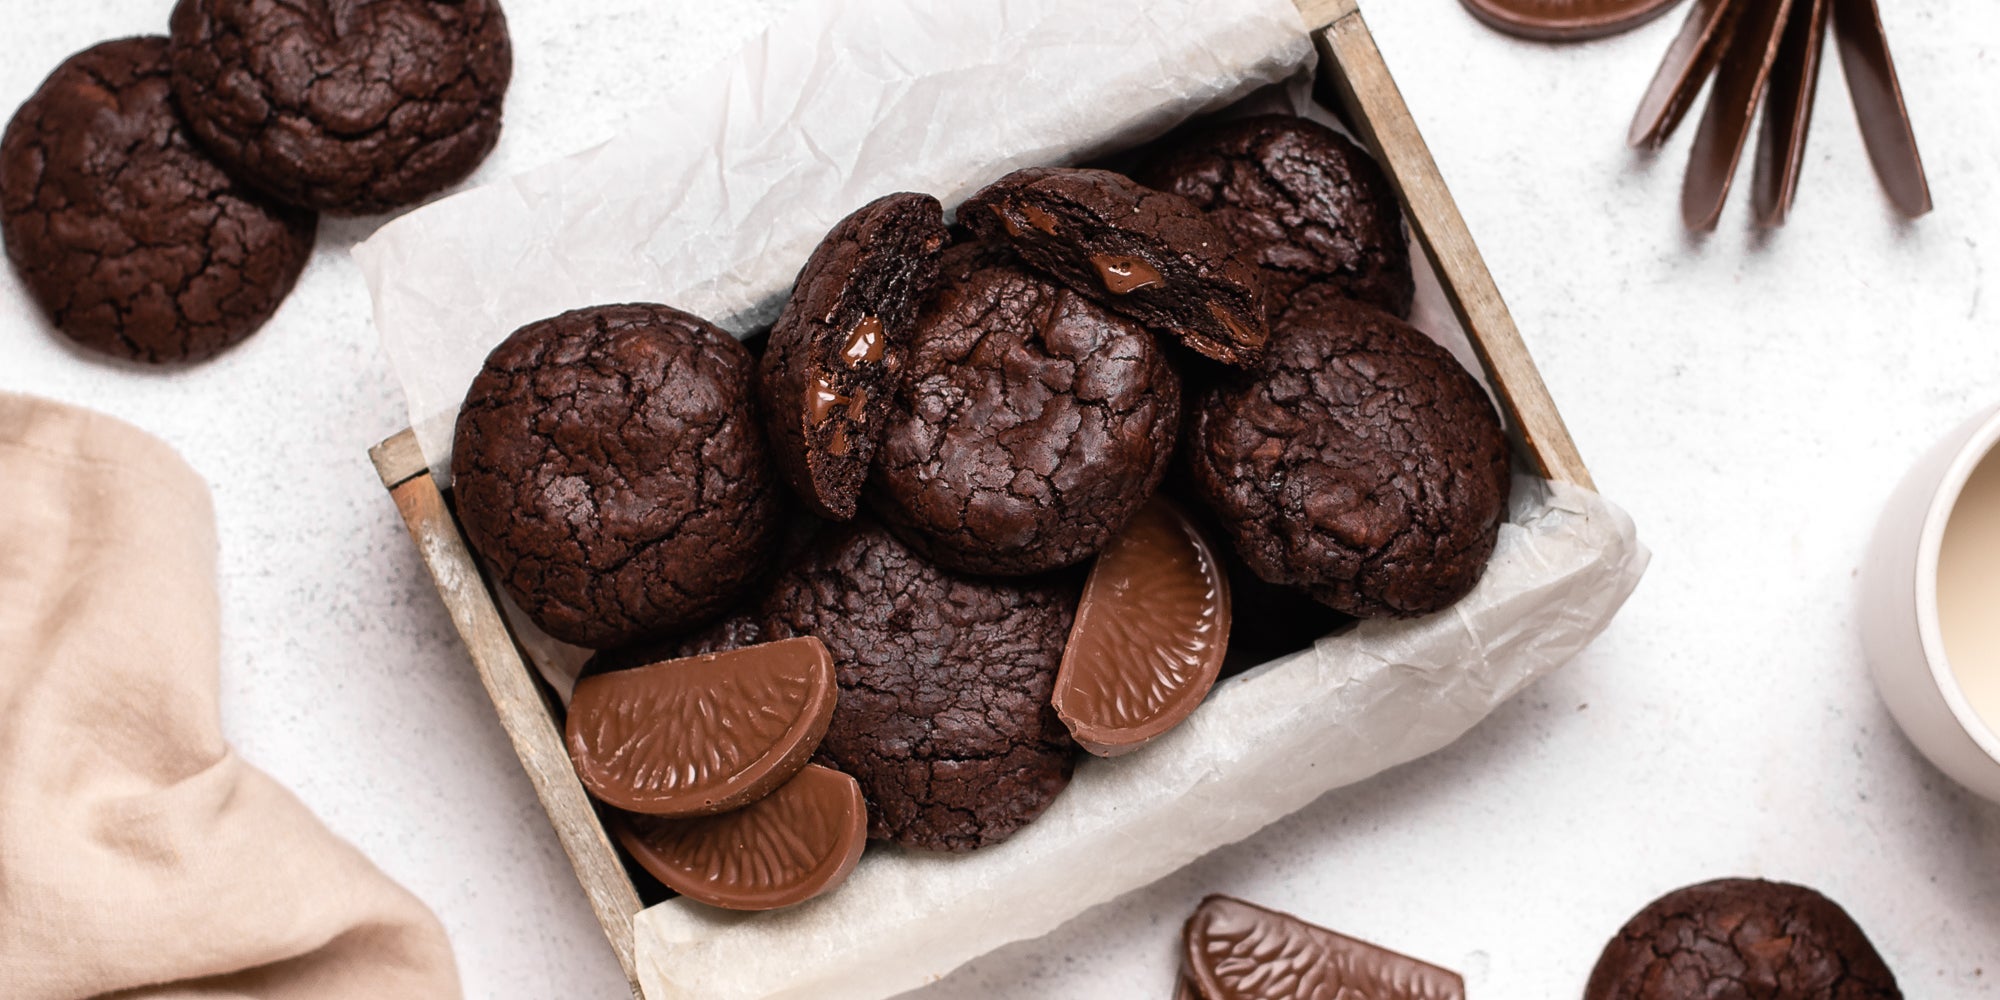 Chocolate Brownie Cookies stuffed with segments of Terry Chocolate orange pieces